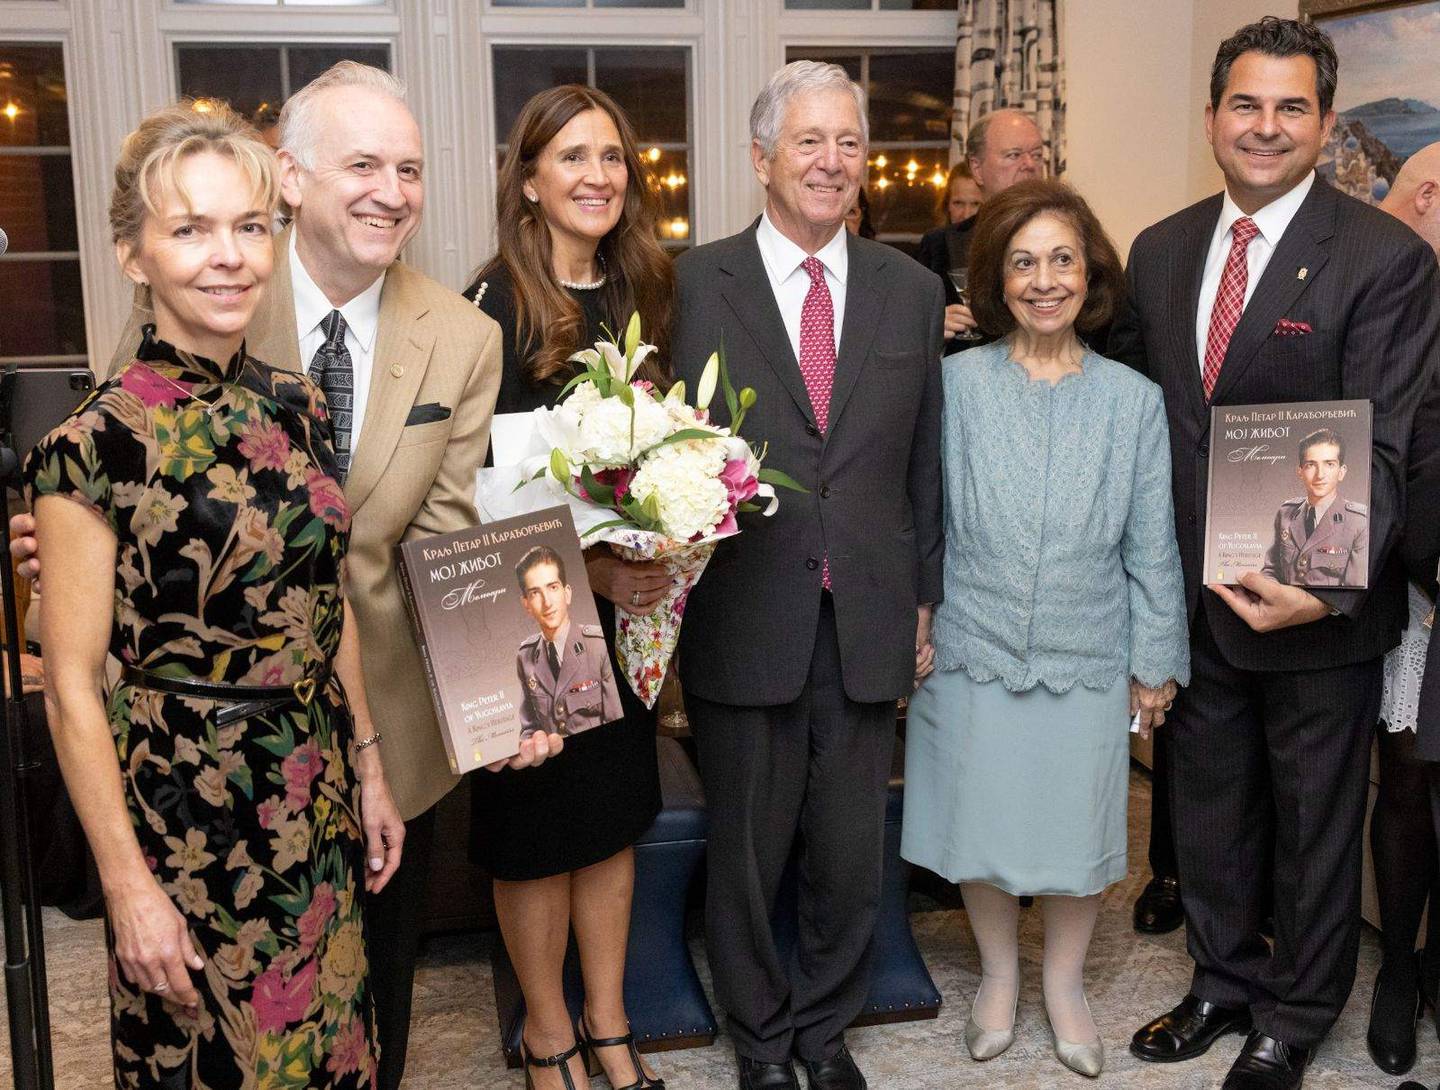 Photo of The Crown Prince Alexander (descendant of Queen Victoria) and Crown Princess Katherine of Serbia (center and second from right), Ariane and Drostan Hall of Wheaton from far left, Tatjana Nenadovich (next to Drostan Hall) and Dr. Nikola Nenadovich on far right. Drostan Hall is music director and founder of Camerata Chicago in Wheaton. Photographer Daniel Anderson